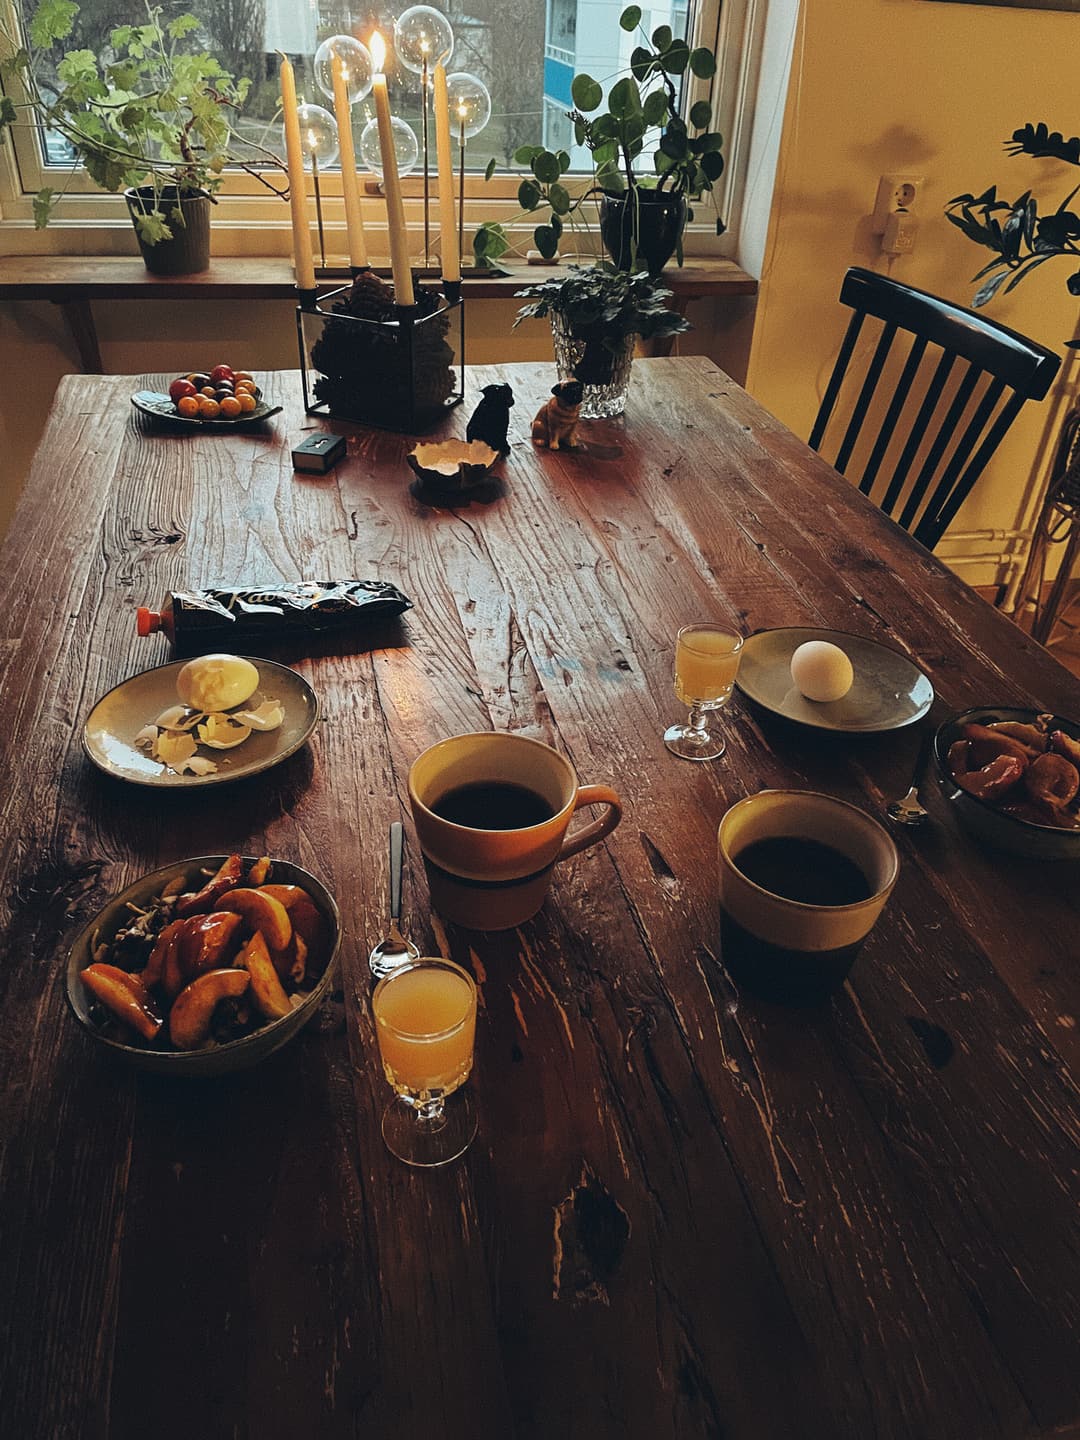 A rustic kitchen table. A lit candle makes for a cozy atmosphere. Coffee, eggs, energizing juice shot, and granola are served.